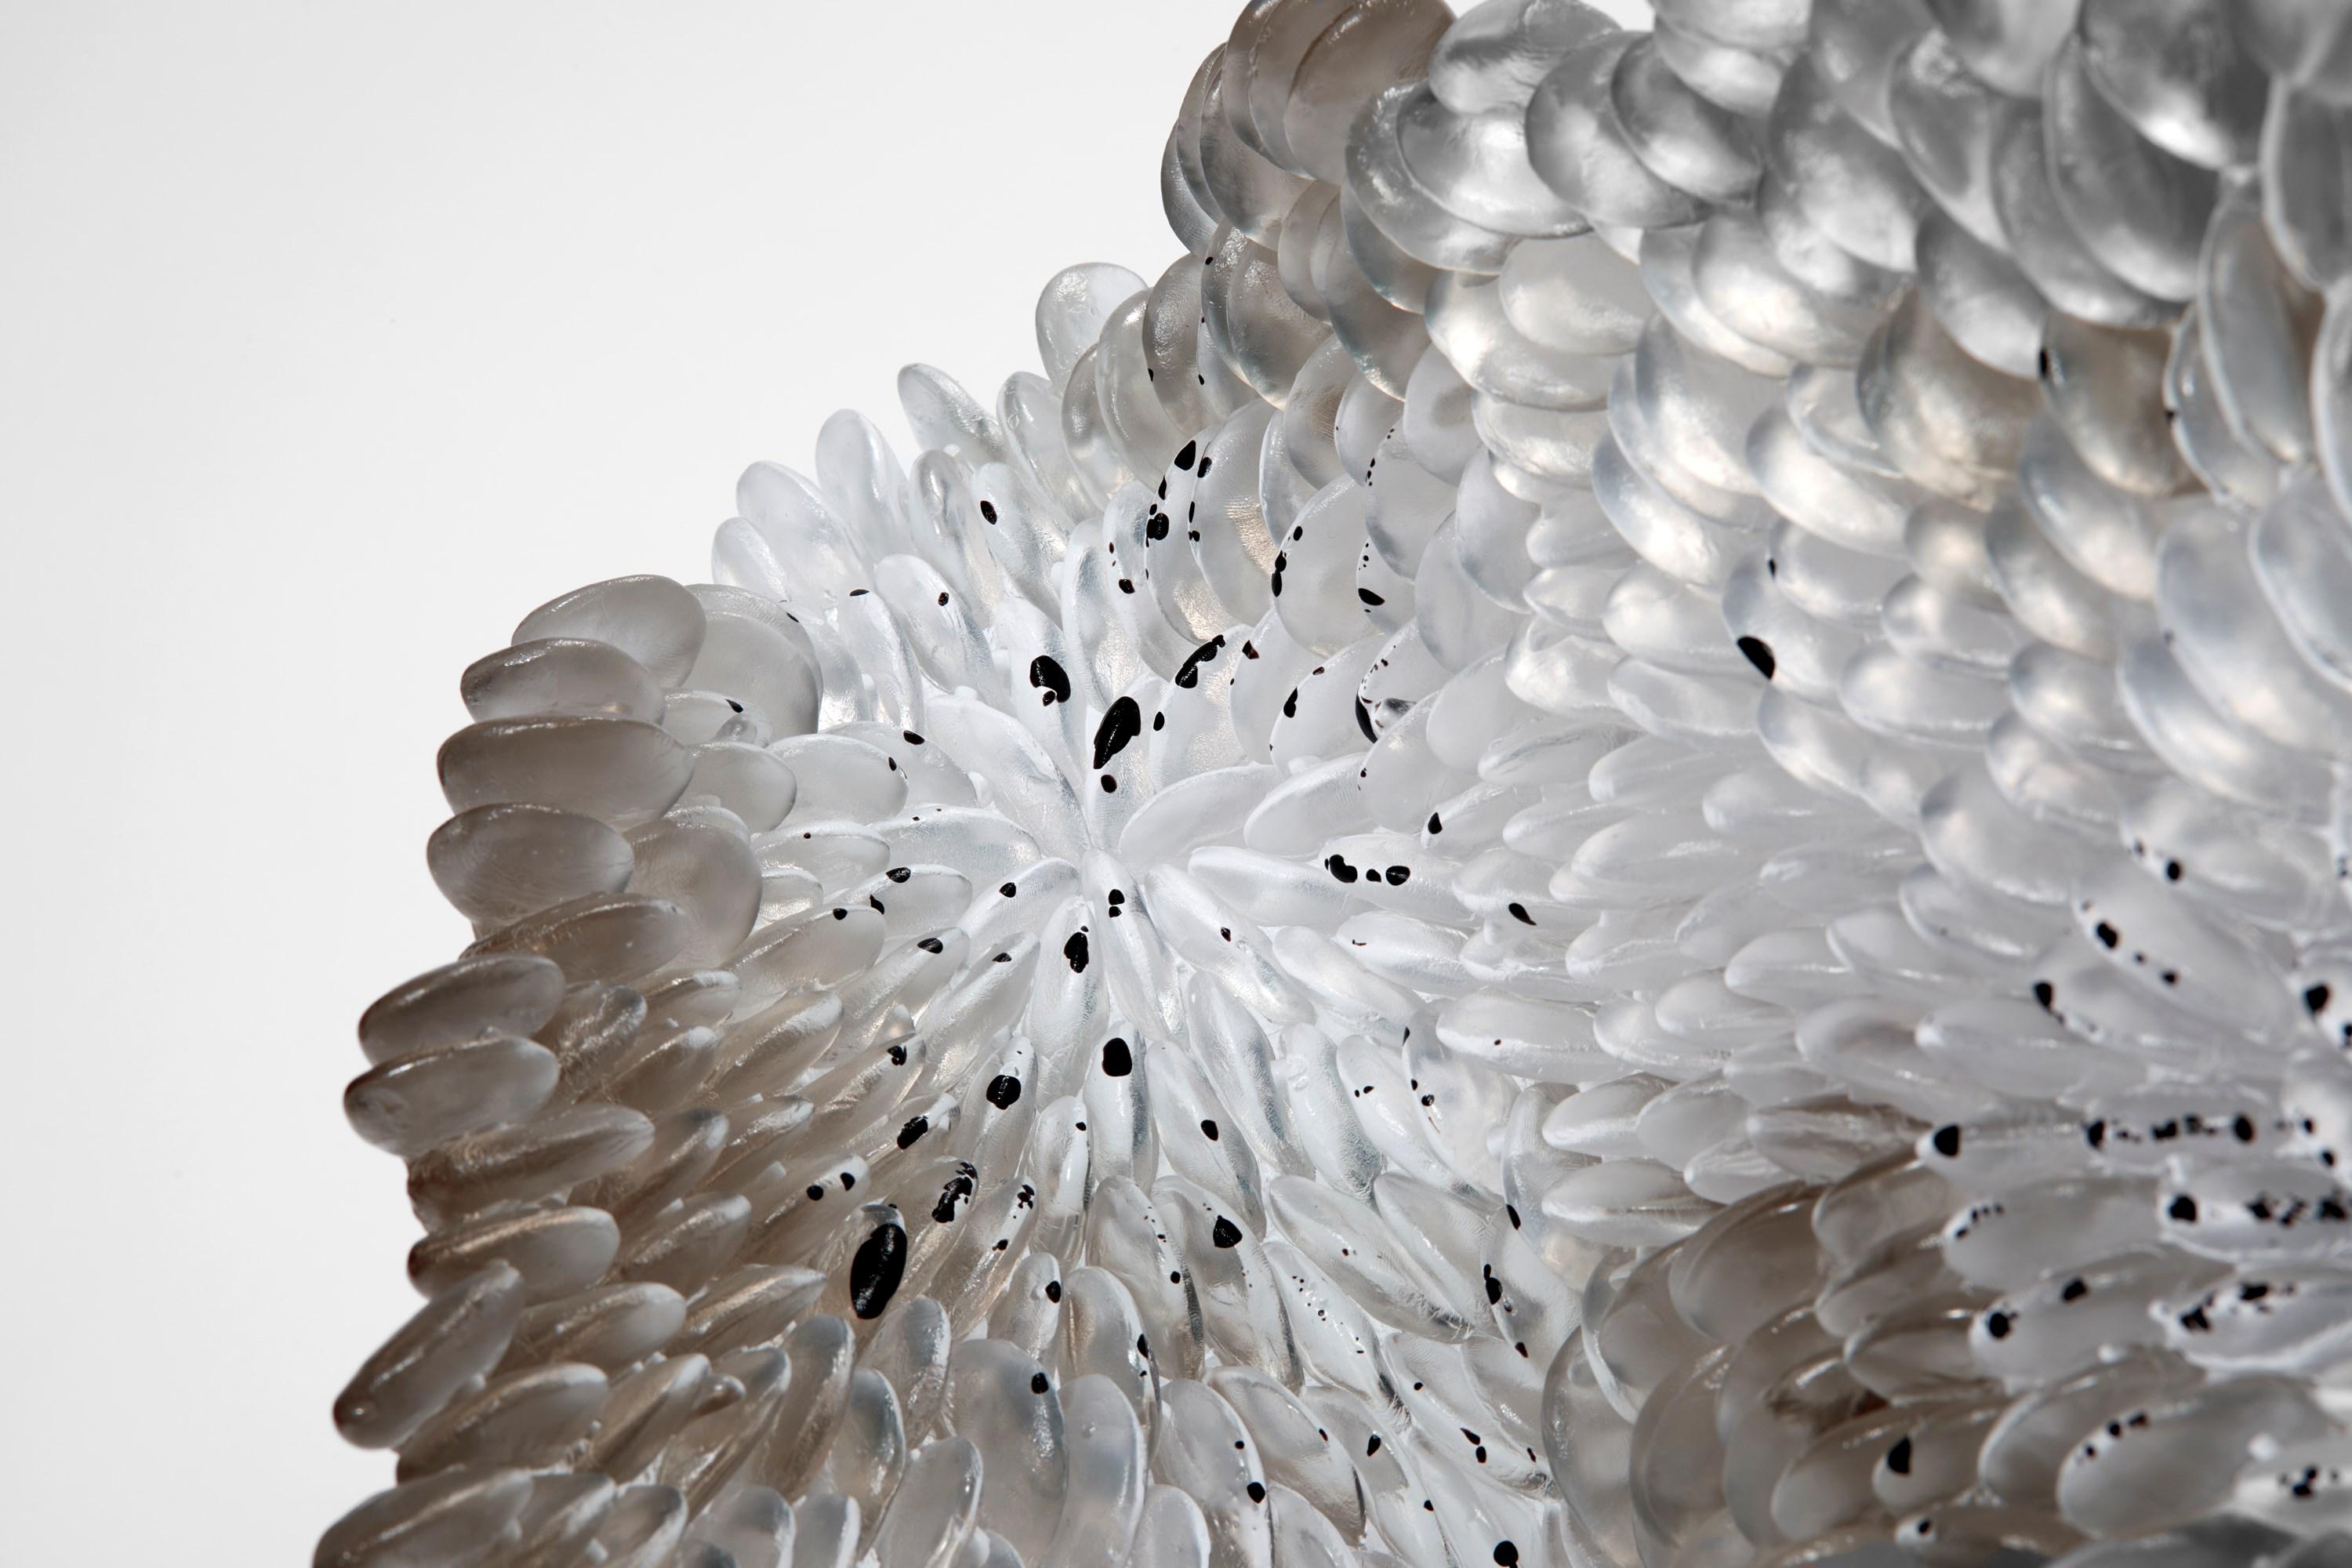 British Speckled Grey, Standing Textured Cast Glass Sculpture by Nina Casson McGarva For Sale